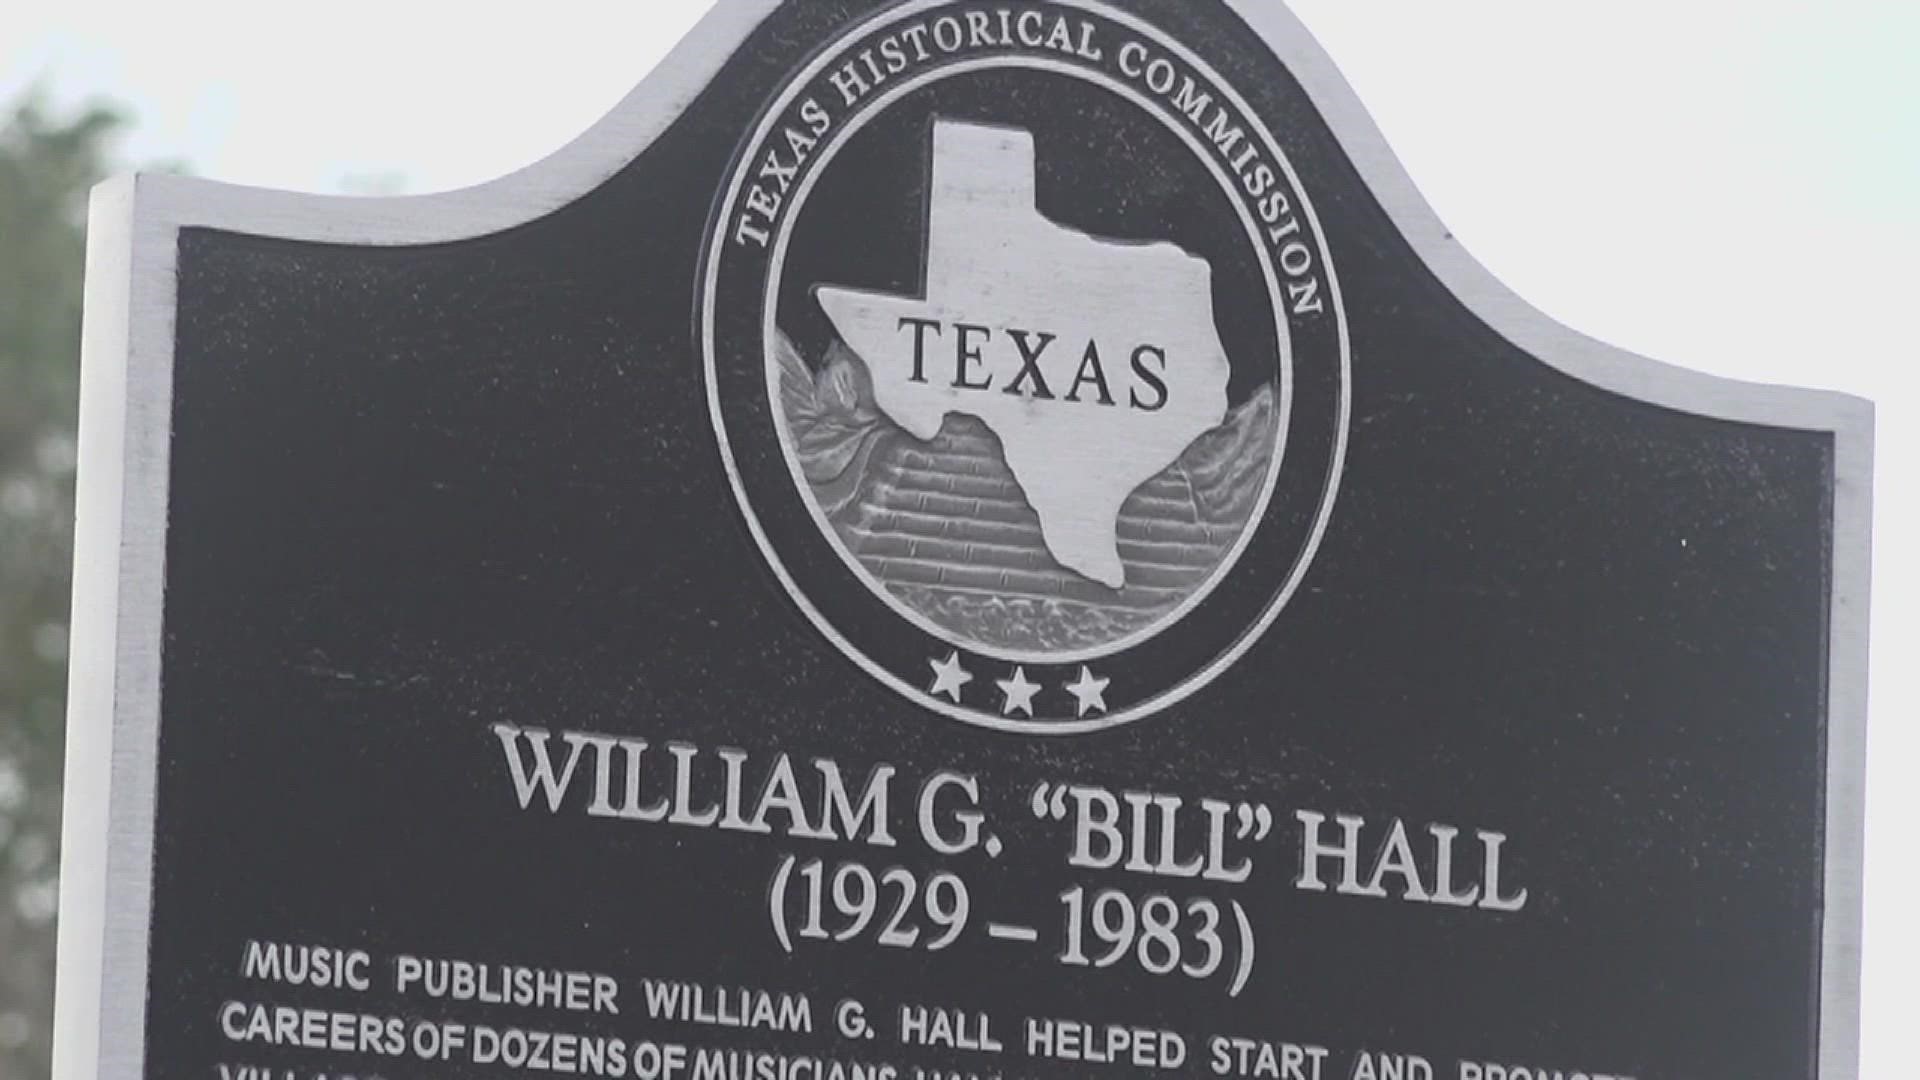 William G. Hall is known for putting the Beaumont's music industry on the map.